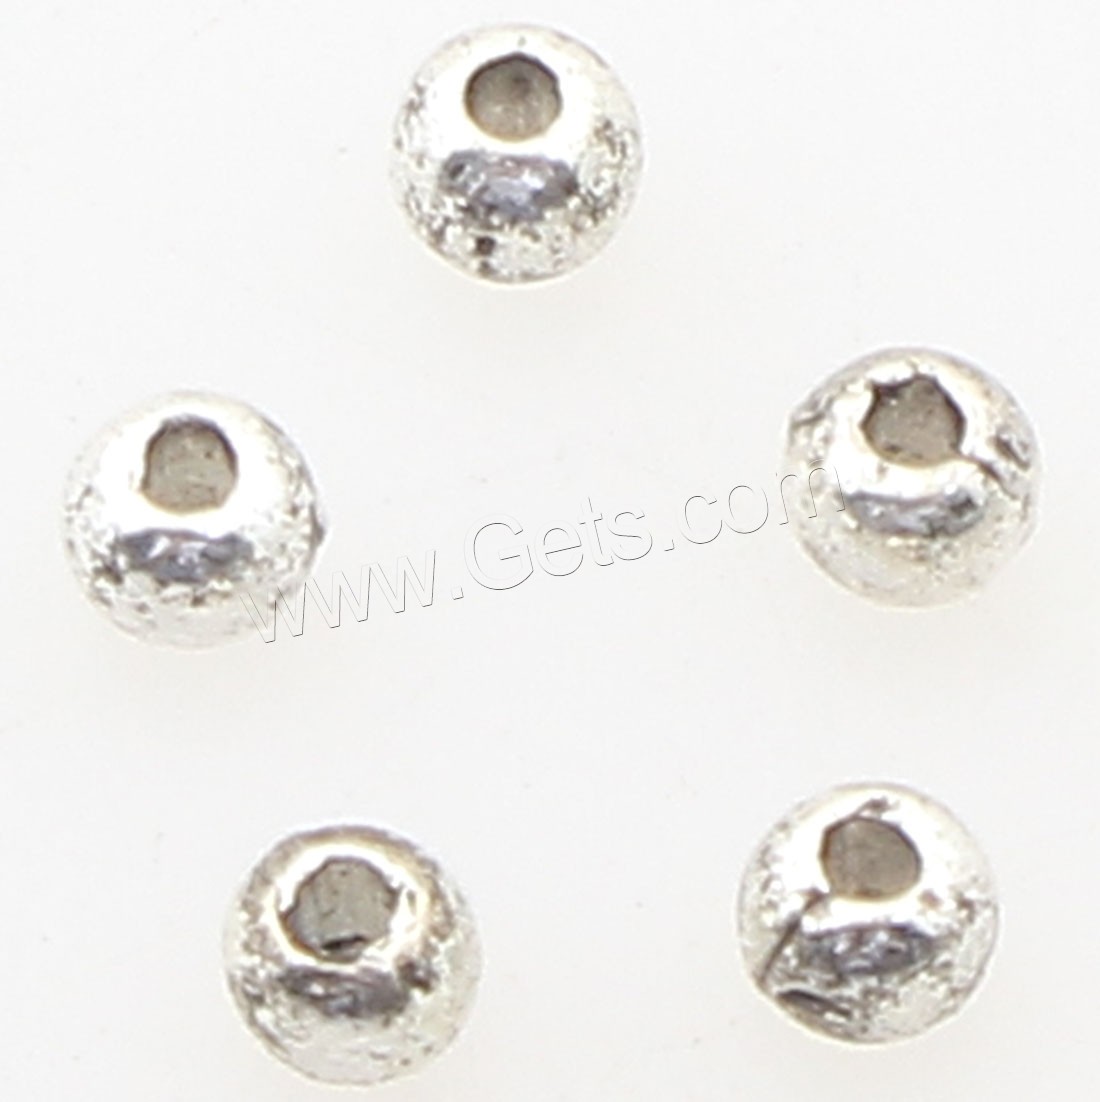 Zinc Alloy Jewelry Beads, antique silver color plated, 3x3mm, Hole:Approx 1mm, Approx 830PCs/Bag, Sold By Bag